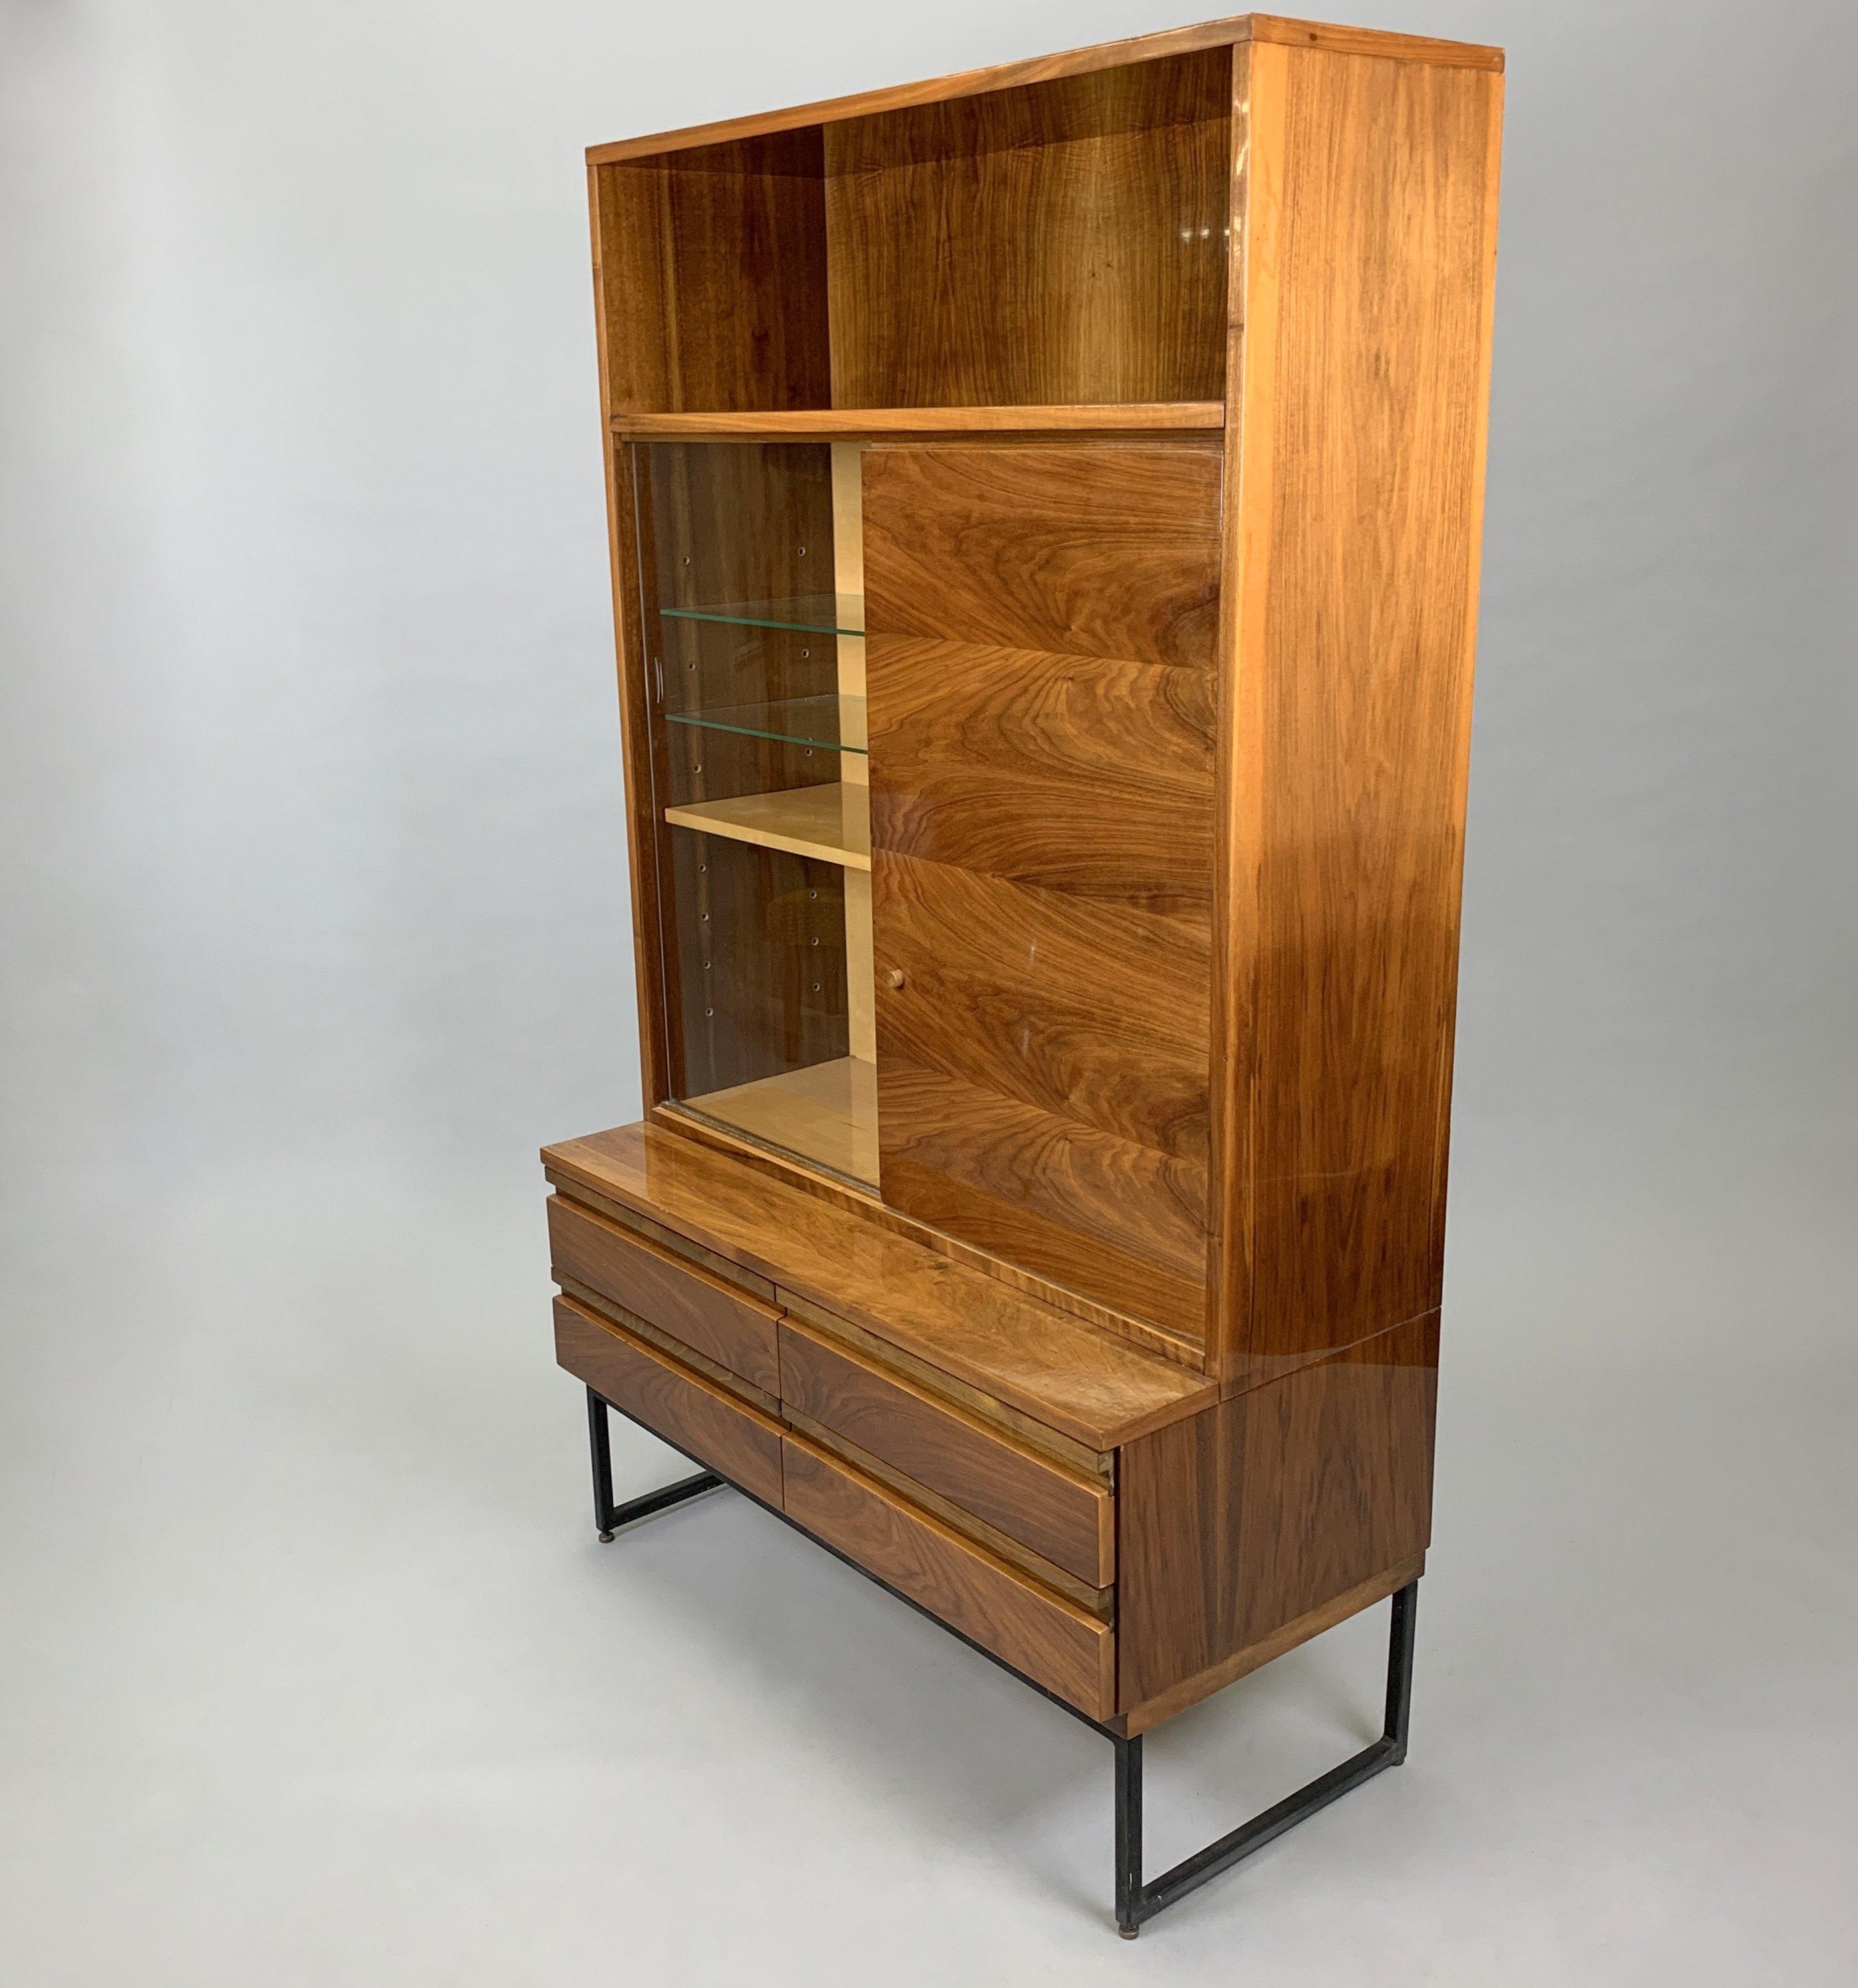 Vintage display cabinet with shelves and drawers from 'Belmondo' collection made in high gloss. Made in Czechoslovakia by Novy Domov (marked) in the 1970s. Good original condition.